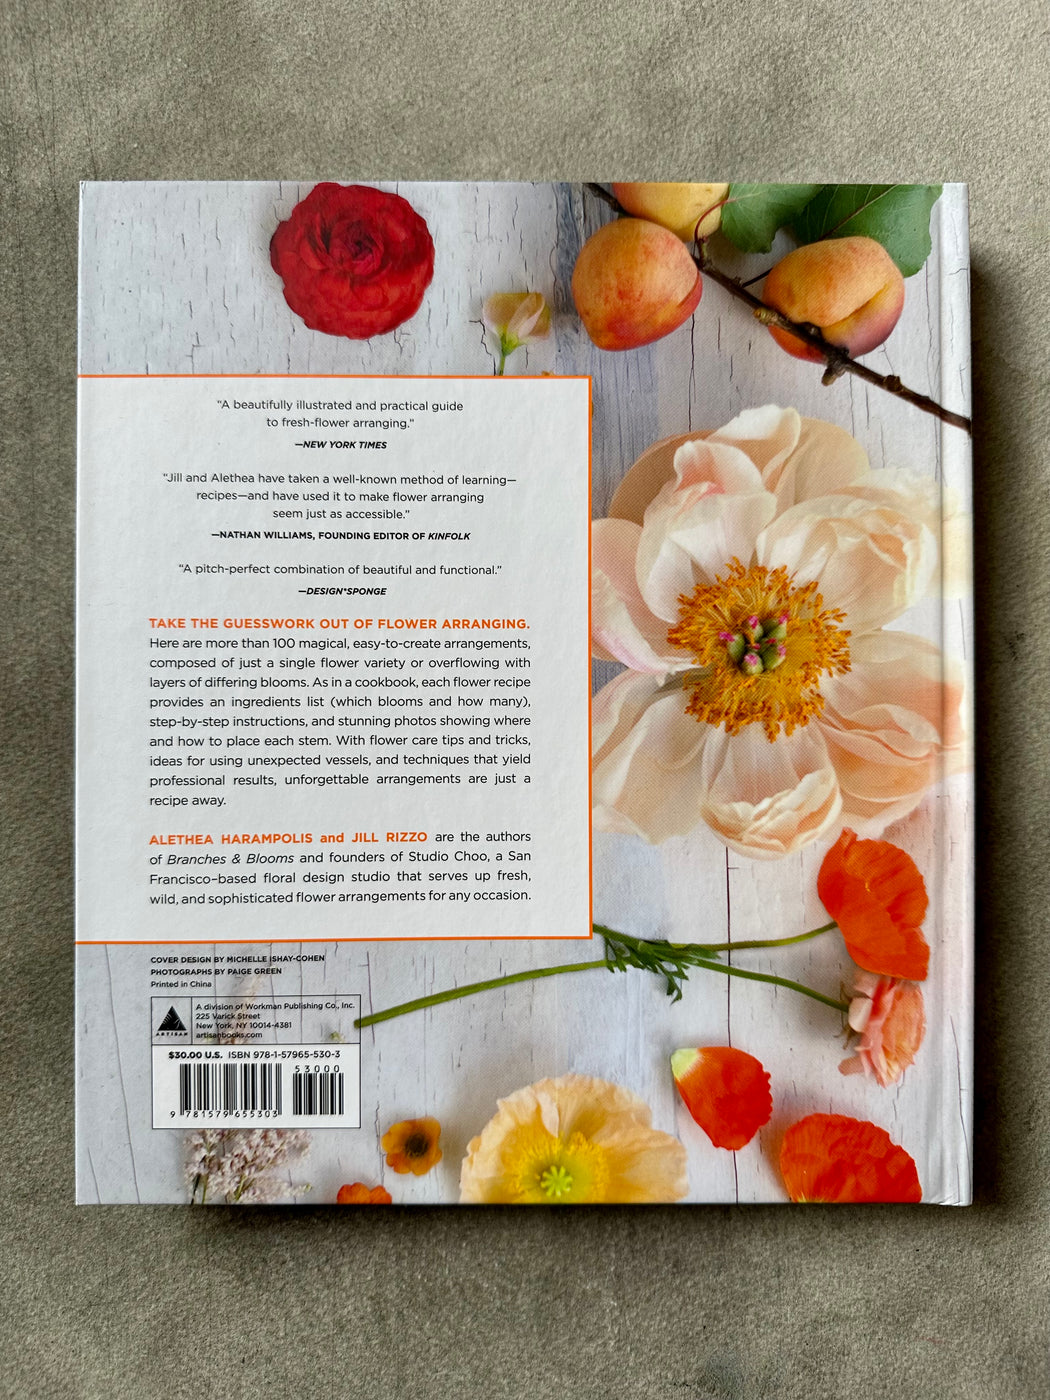 "The Flower Recipe Book" by Althea Harampolis and Jill Rizzo